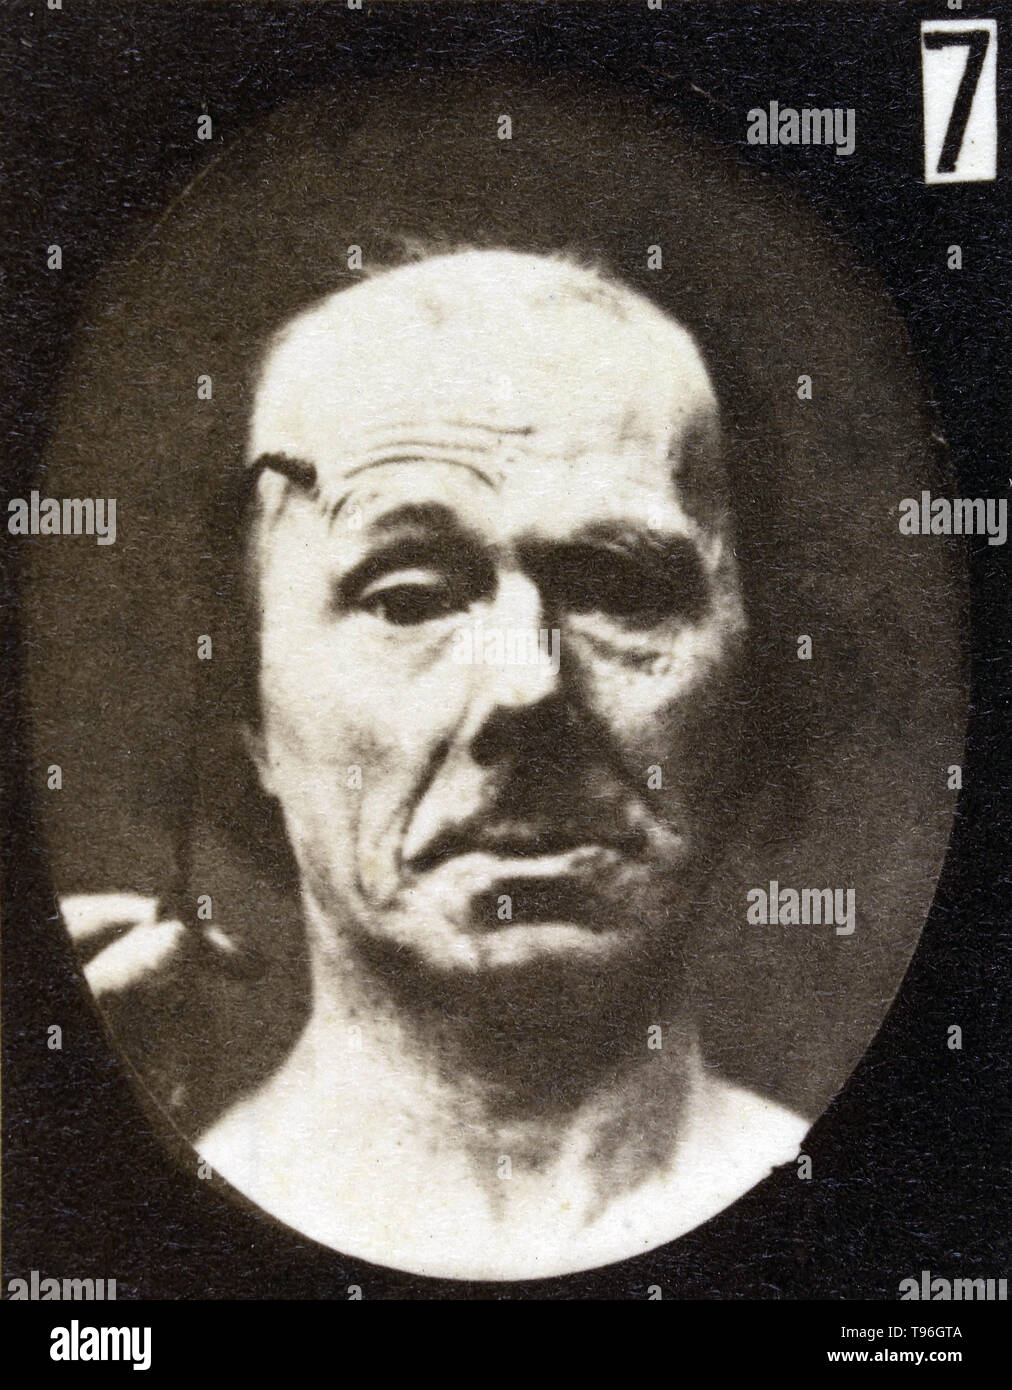 The facial expression of attention on the human face being induced by electrical currents. Guillaume-Benjamin-Amand Duchenne de Boulogne (September 17, 1806 - September 15, 1875) was a French neurologist who advanced the science of electrophysiology. Influenced by the beliefs of physiognomy, Duchenne wanted to determine how the muscles in the human face produce facial expressions which he believed to be directly linked to the soul of man. Stock Photo